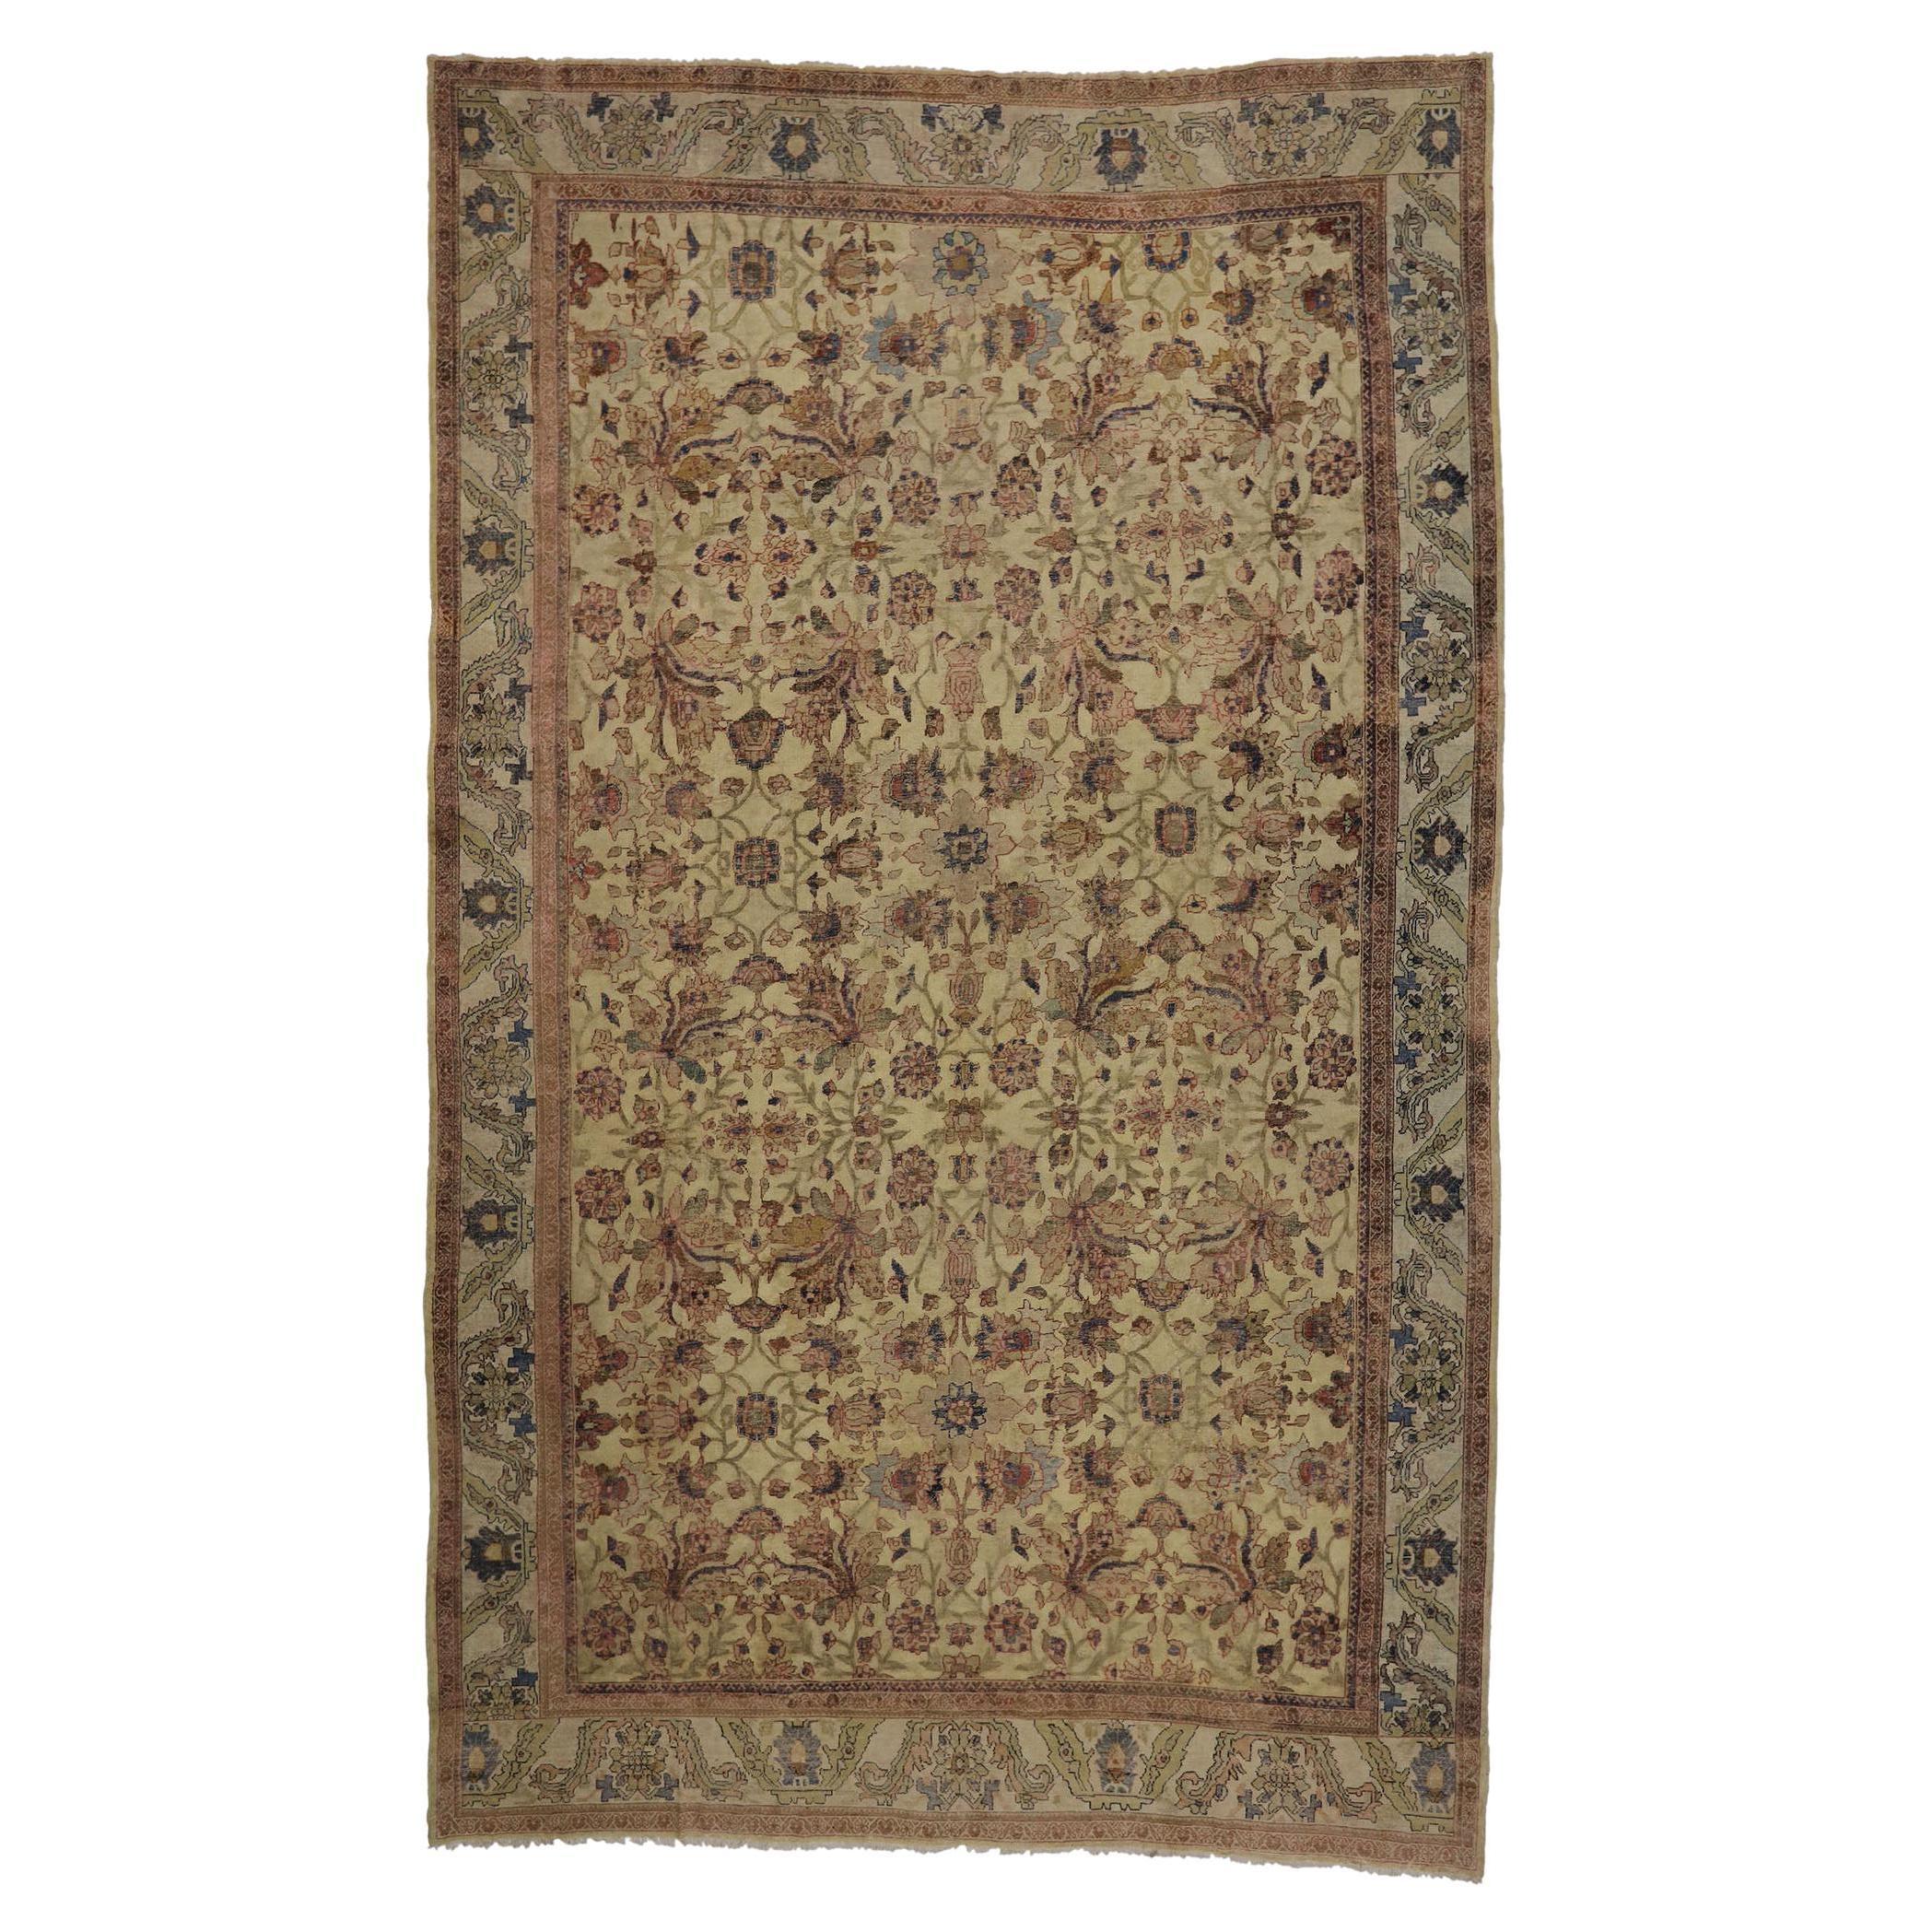 Fin du 19e siècle - Tapis persan antique Sultanabad